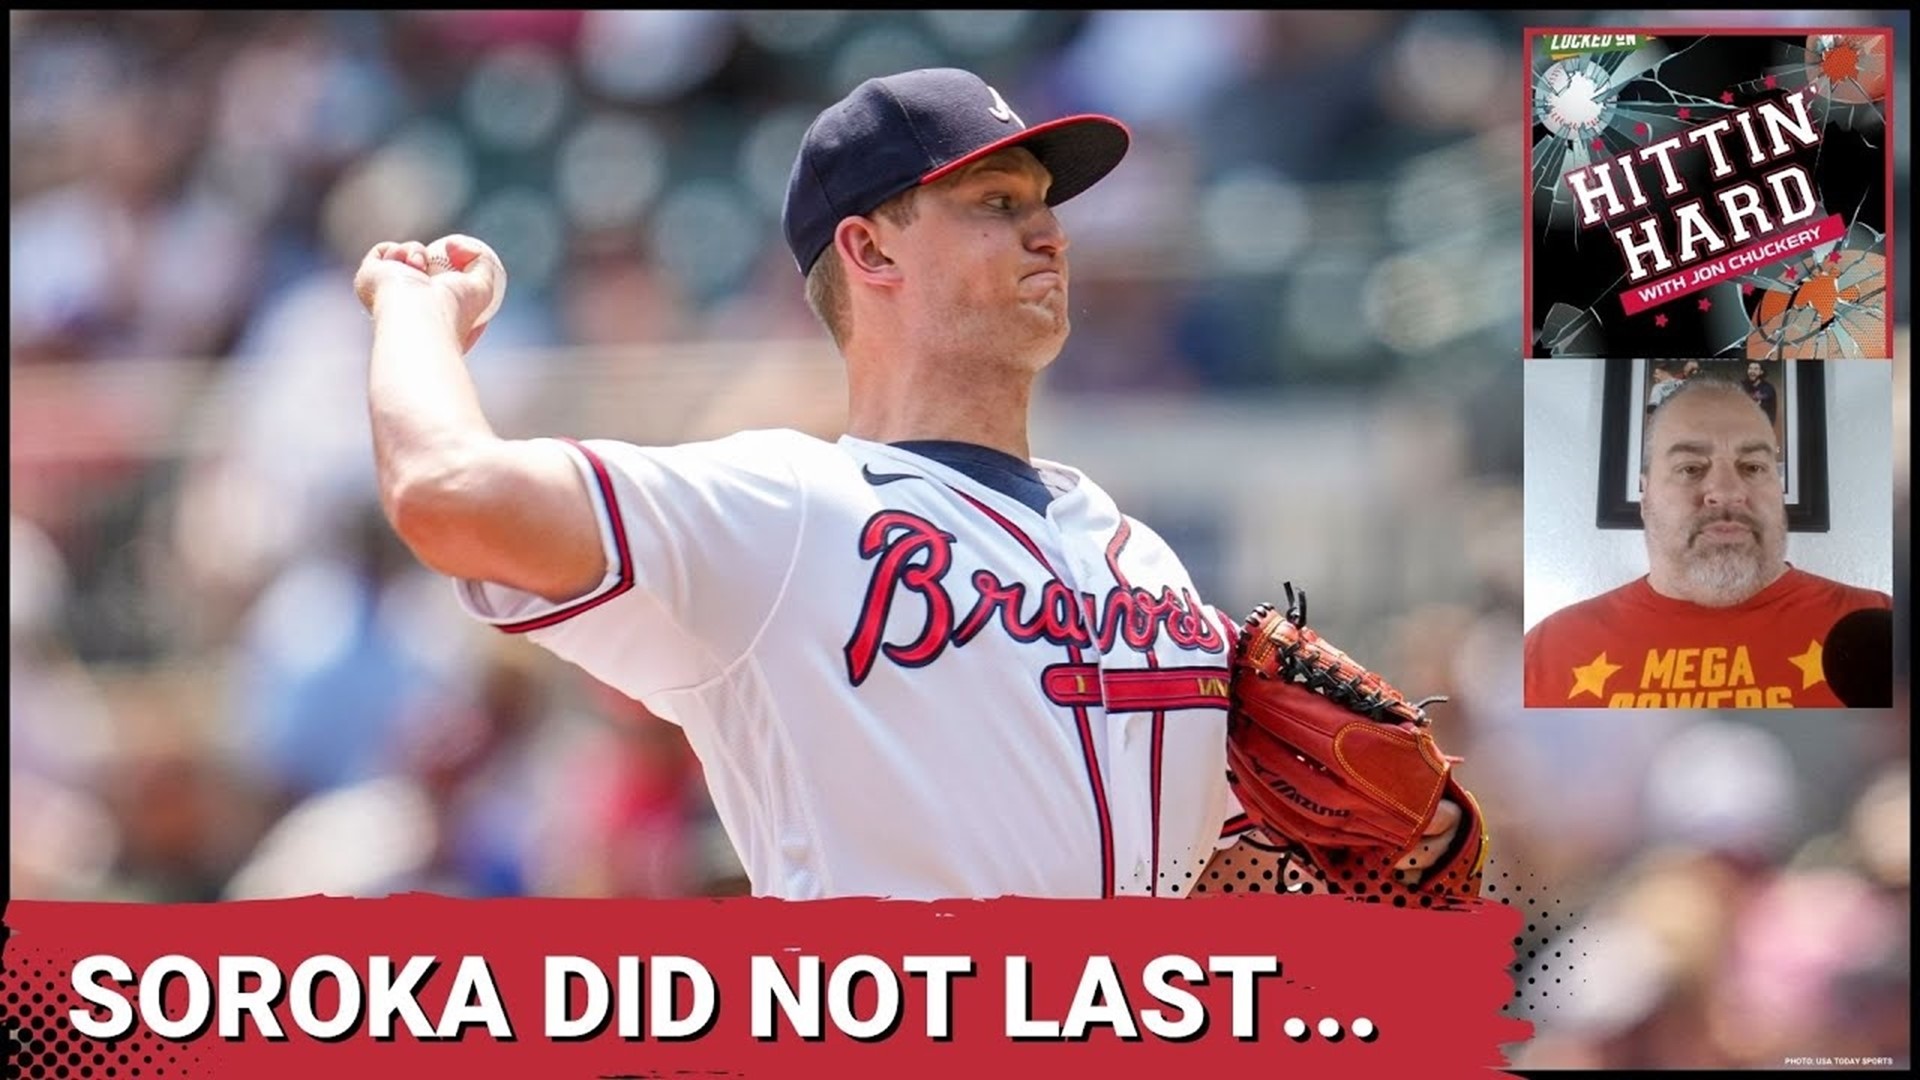 Michael Soroka did not last long against the St. Louis Cardinals. The Atlanta Braves have decided to send him to the injury list.